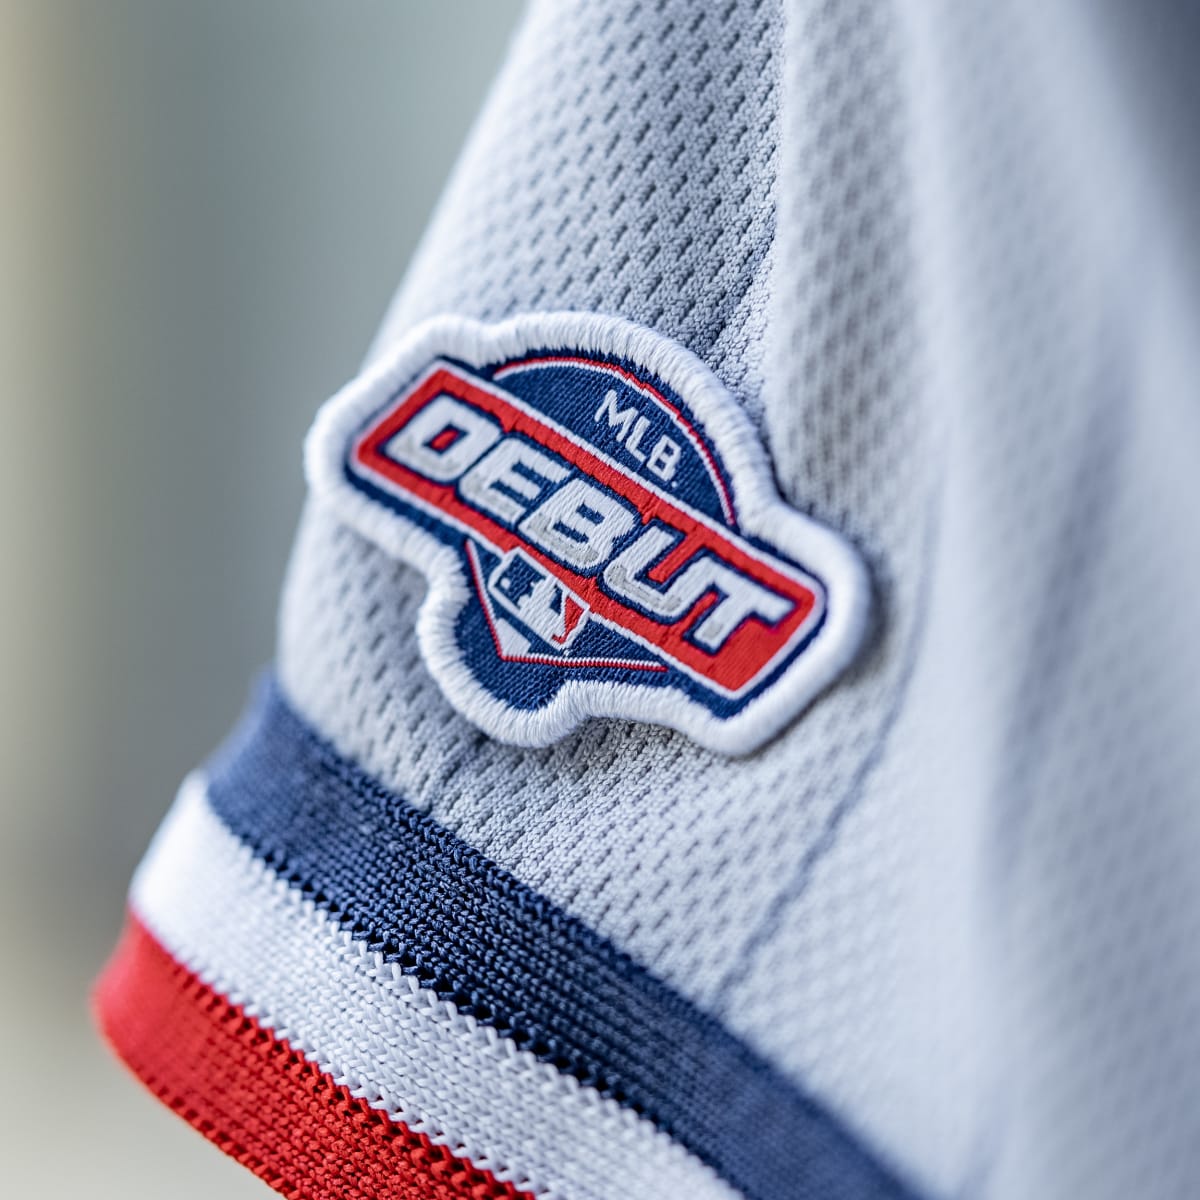 Fanatics unveils special MLB Debut Patches for player jerseys